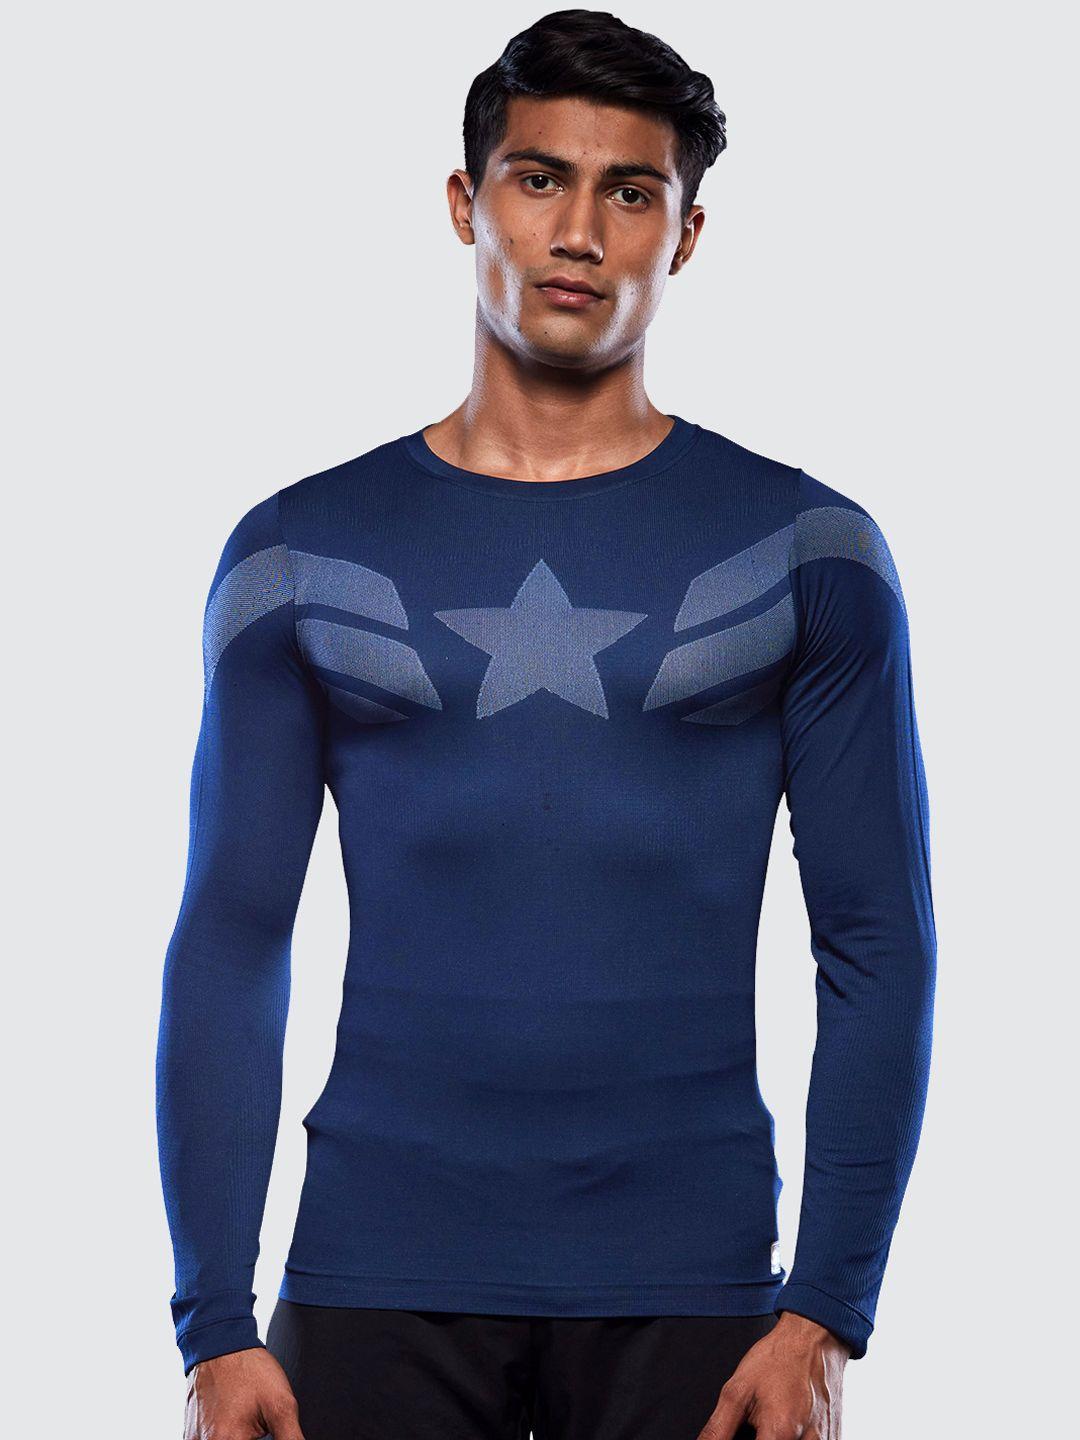 the souled store men blue captain america printed t-shirt base layer active sports wear